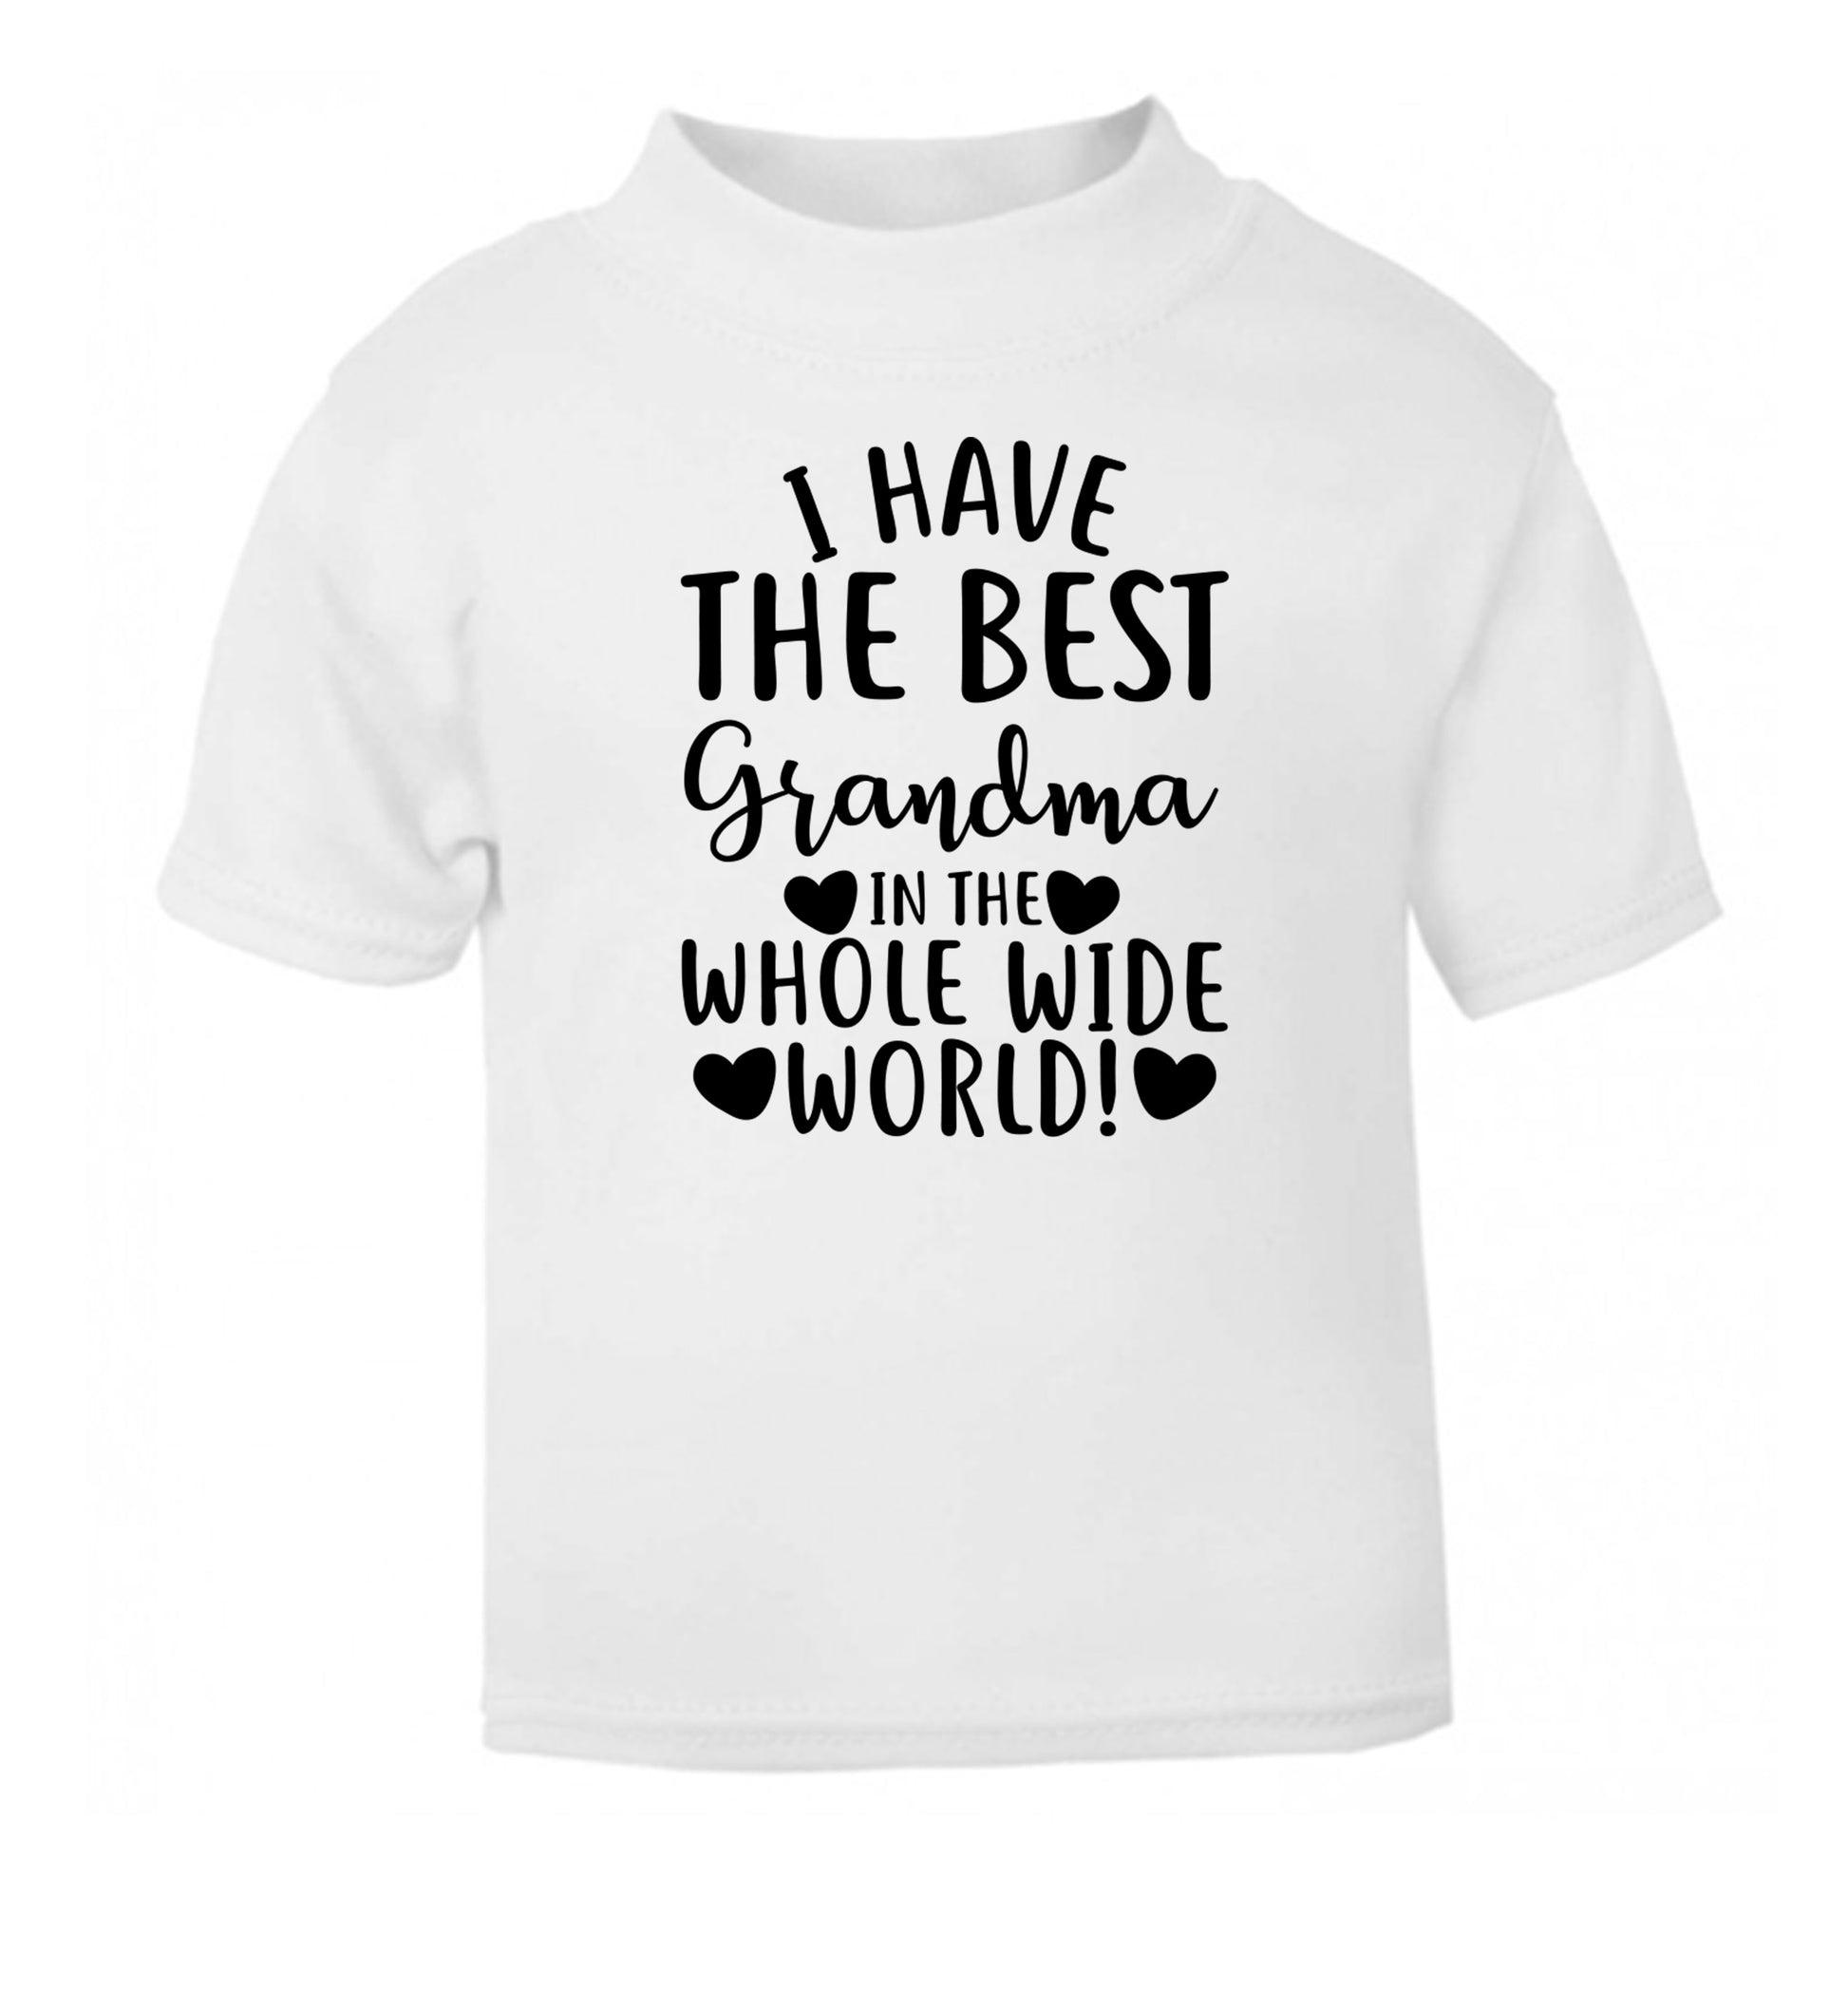 I have the best grandma in the whole wide world! white Baby Toddler Tshirt 2 Years